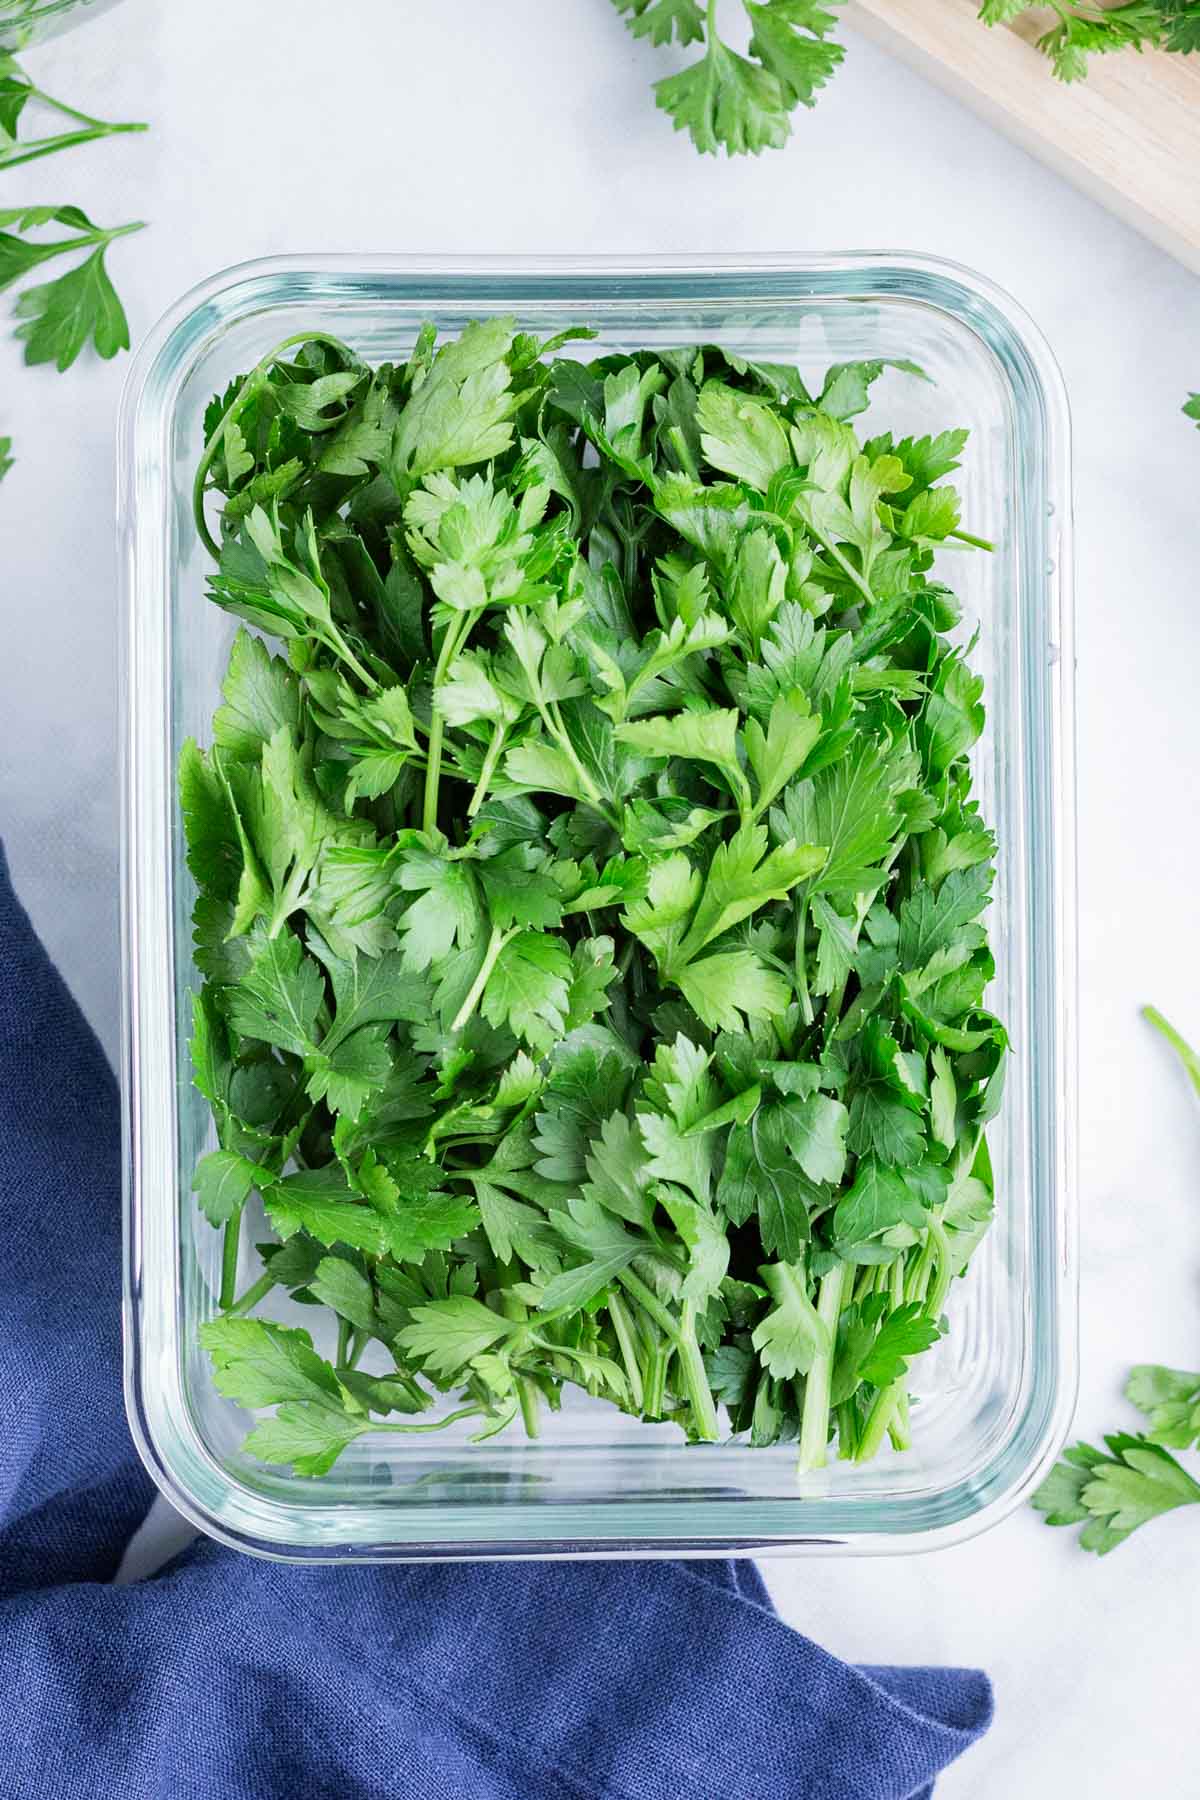 A fresh parsley bunch is stored in an airtight container.